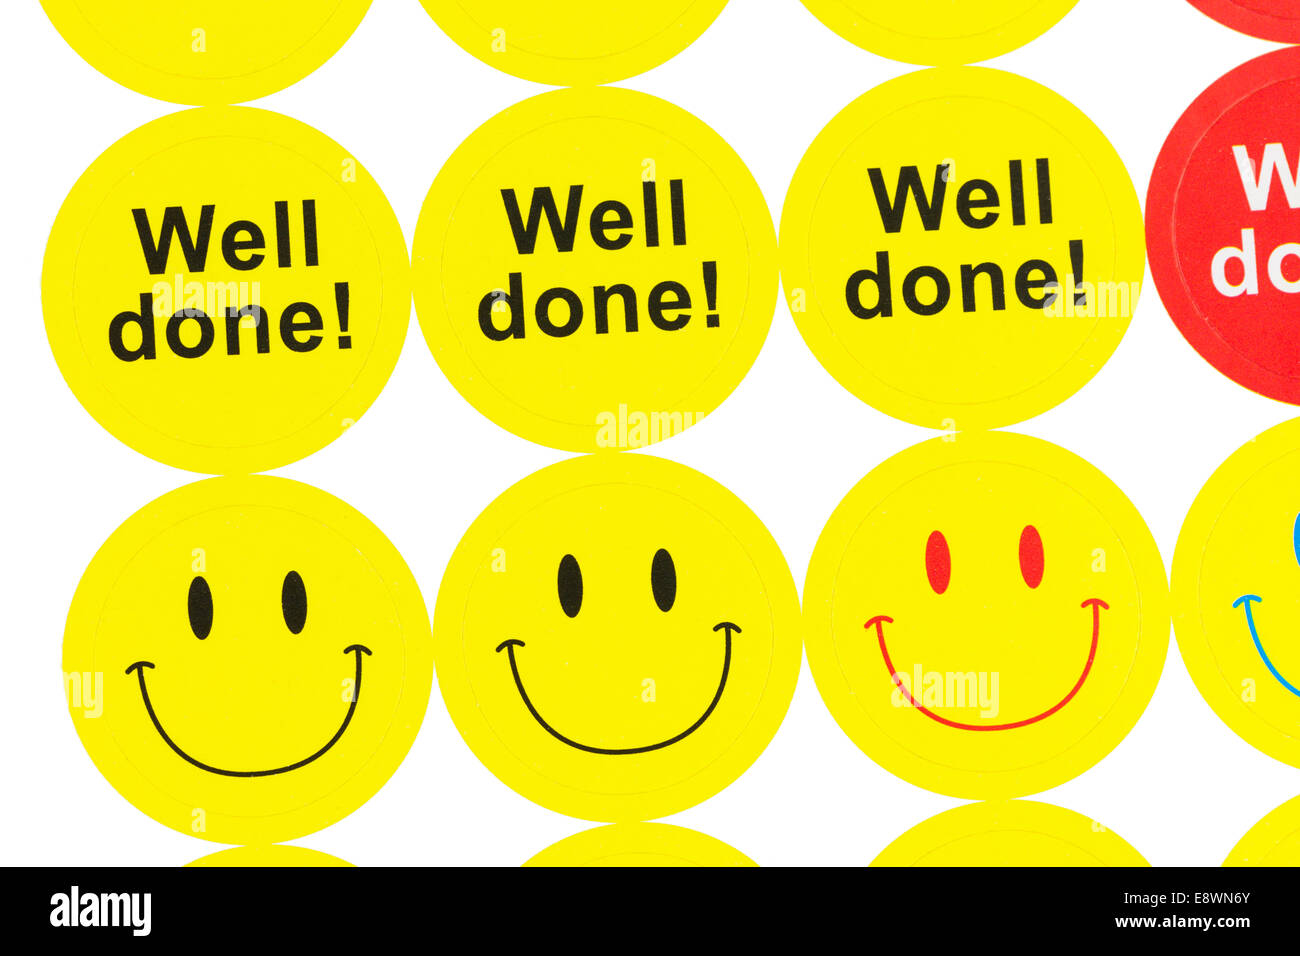 Well done and smiley stickers Stock Photo